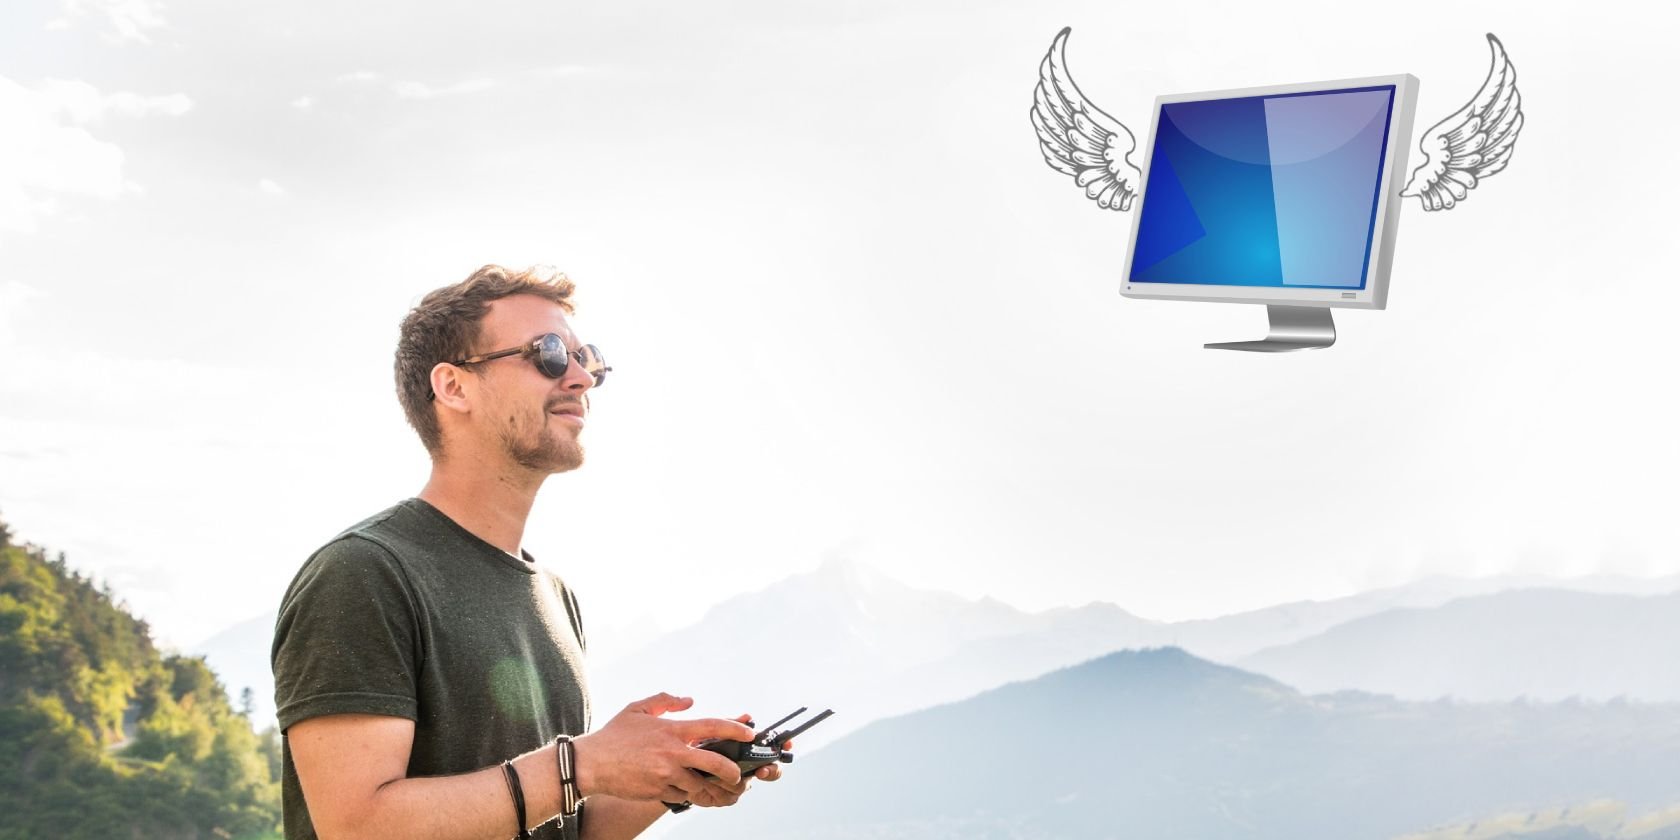 How to Use AnyDesk to Connect Remotely to a Windows PC